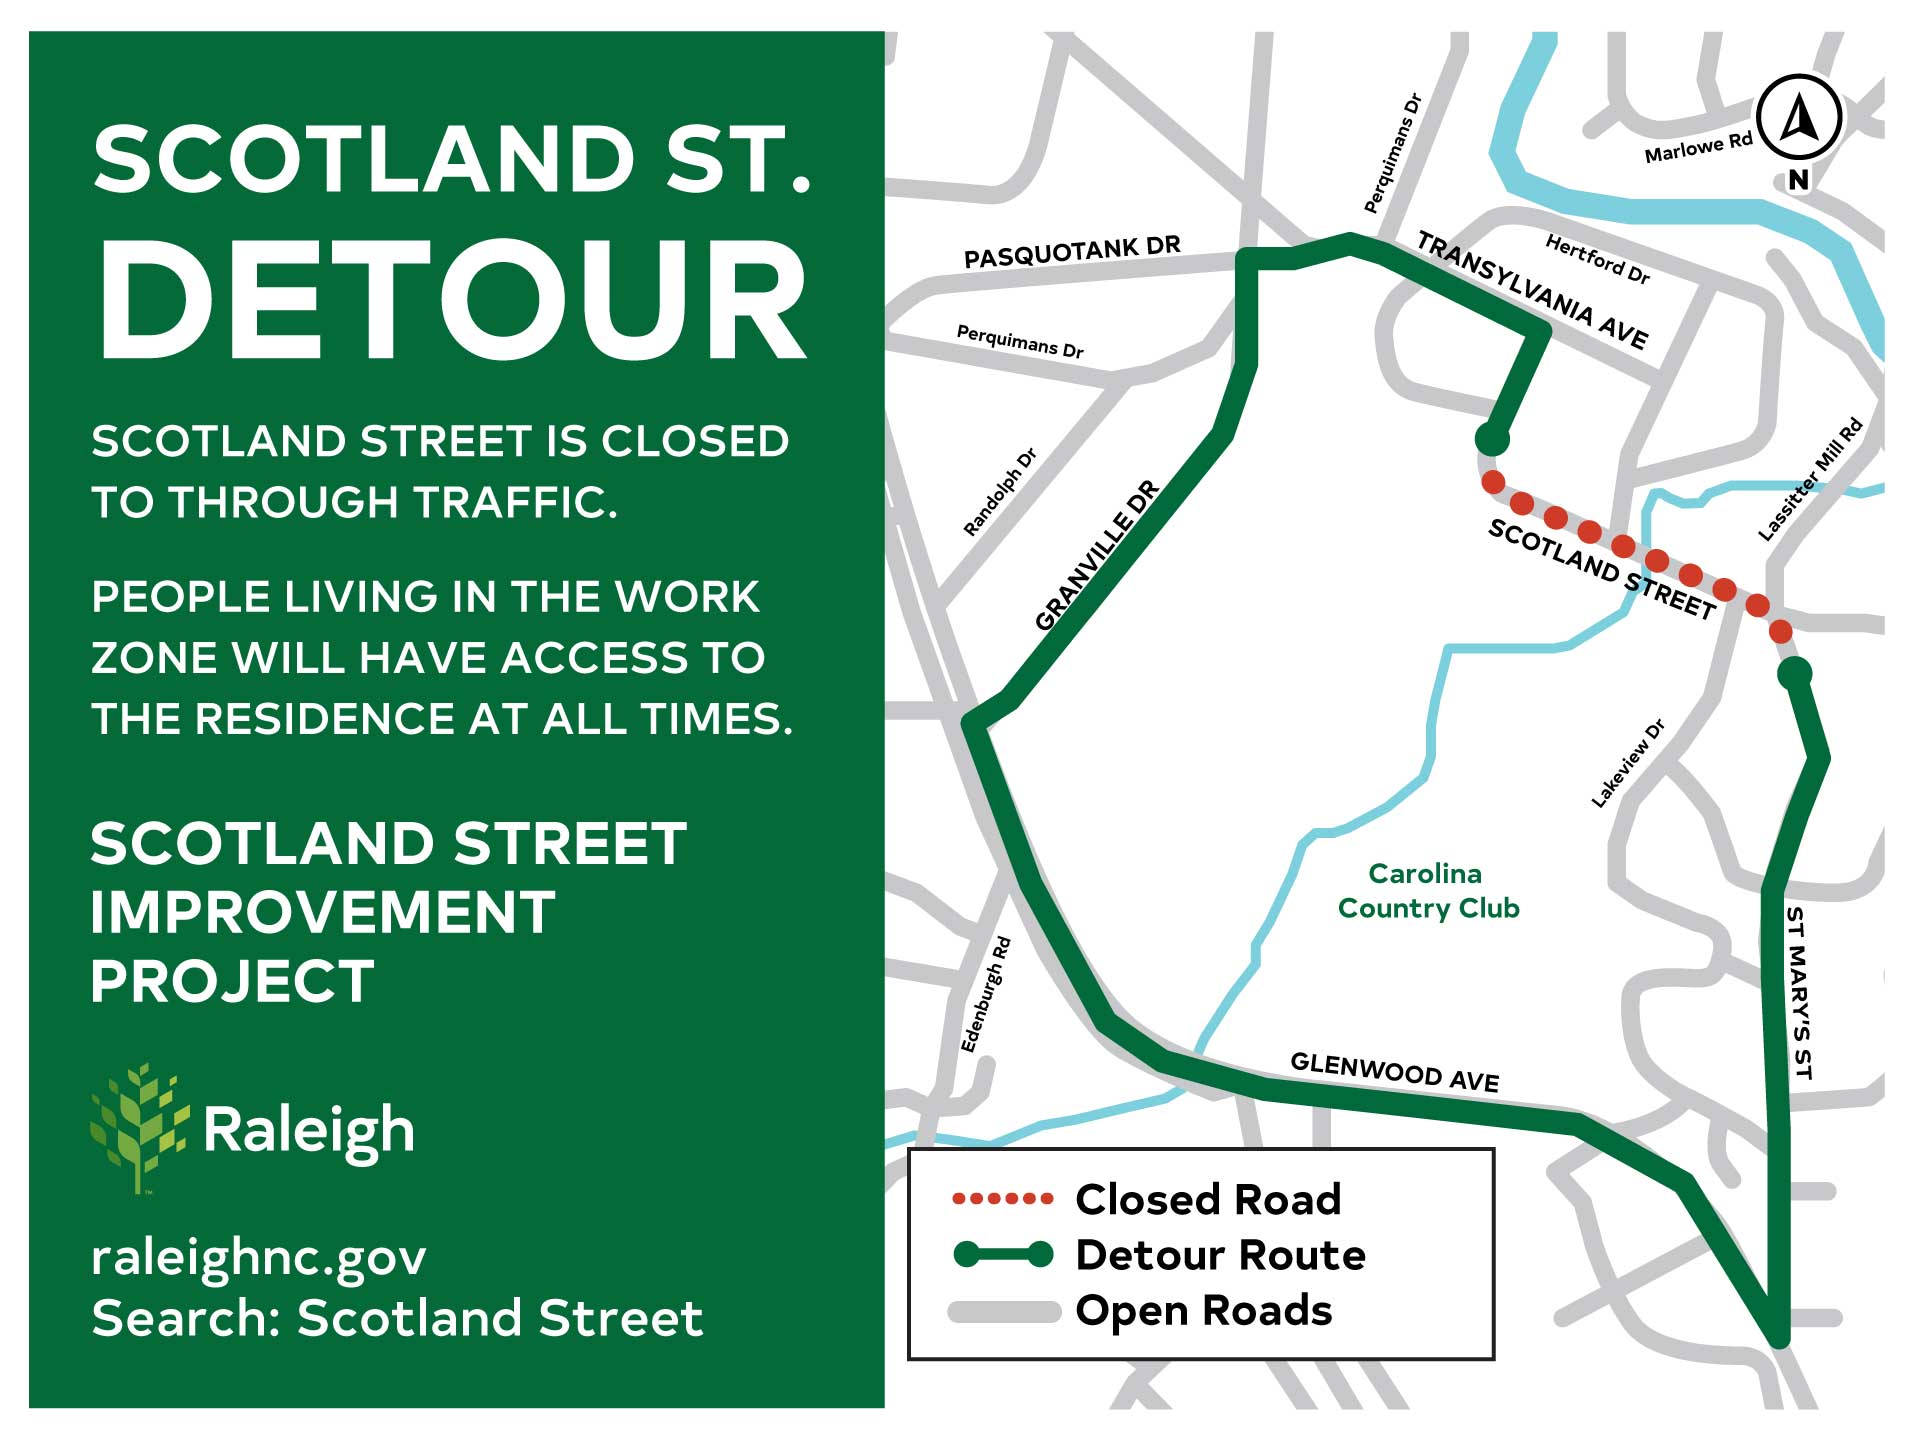 Detour map for Scotland Street. Scotland St. will be closed between Lassiter Mill Road and Hertford Drive . Detour route is  St Mary's Glenwood Ave. Granville Dr. and Transylvania Ave. 